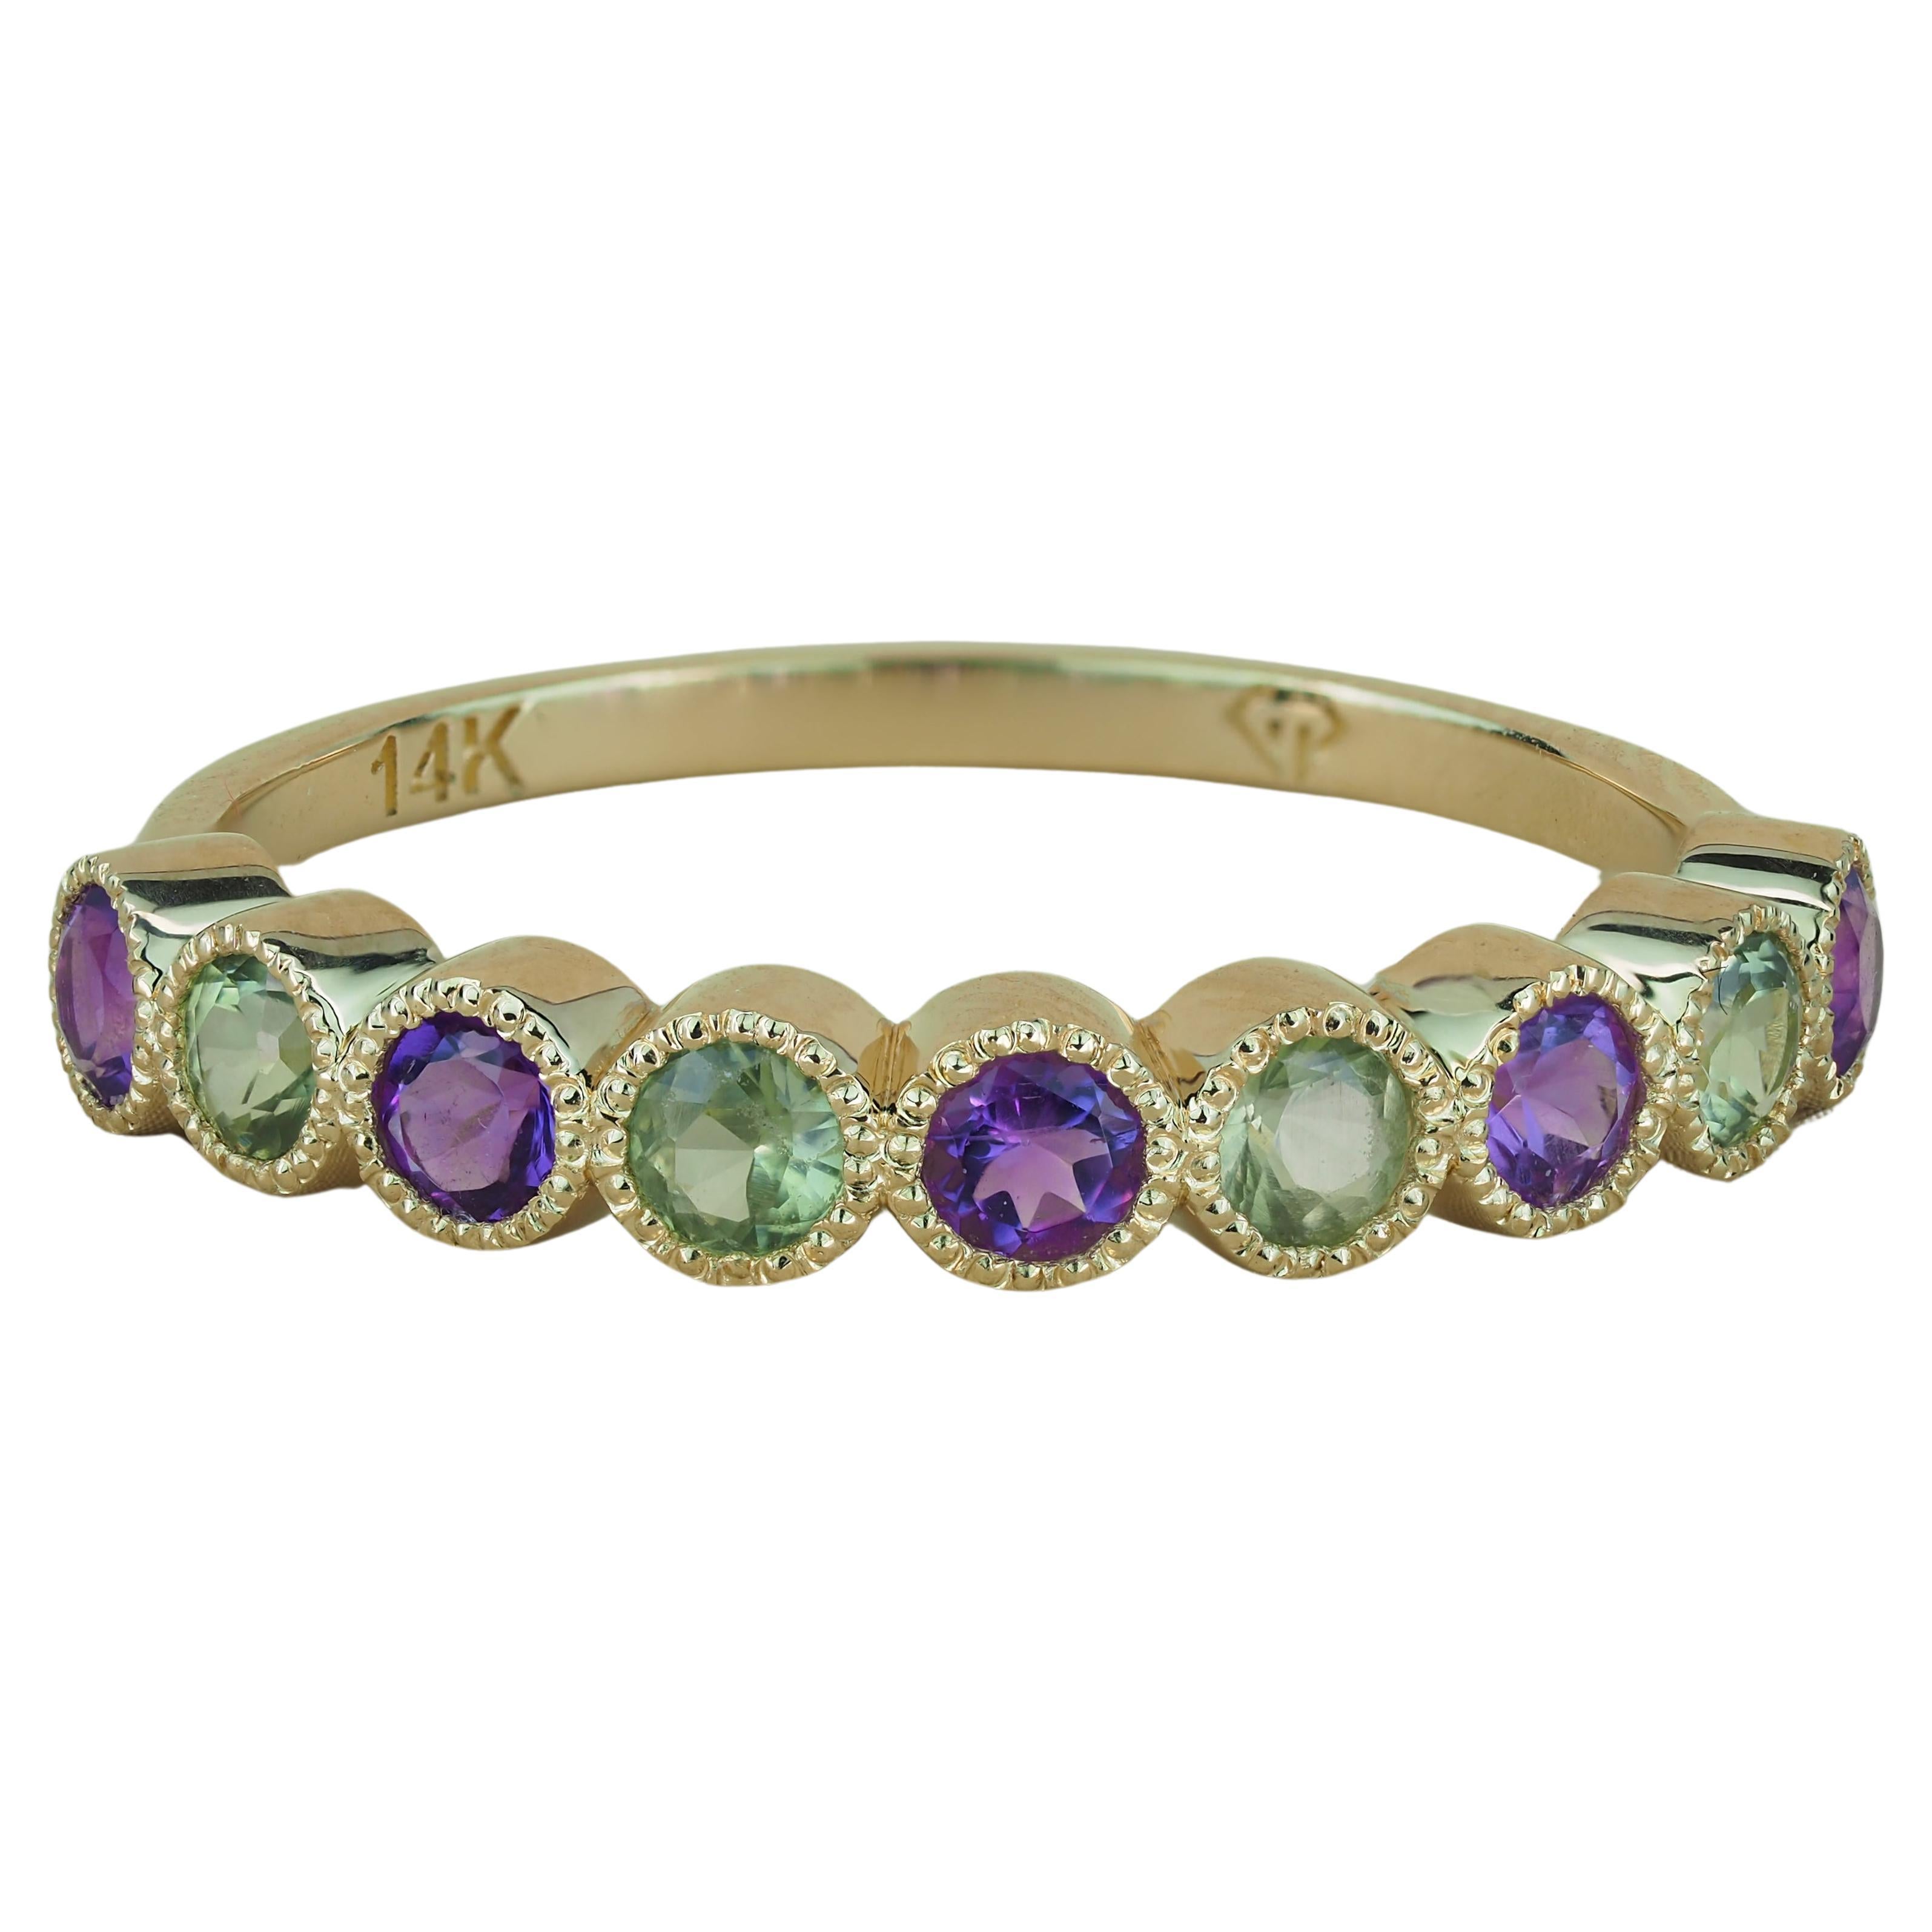 For Sale:  Green Sapphire, Amethyst Pave 14k gold half eternity Band.